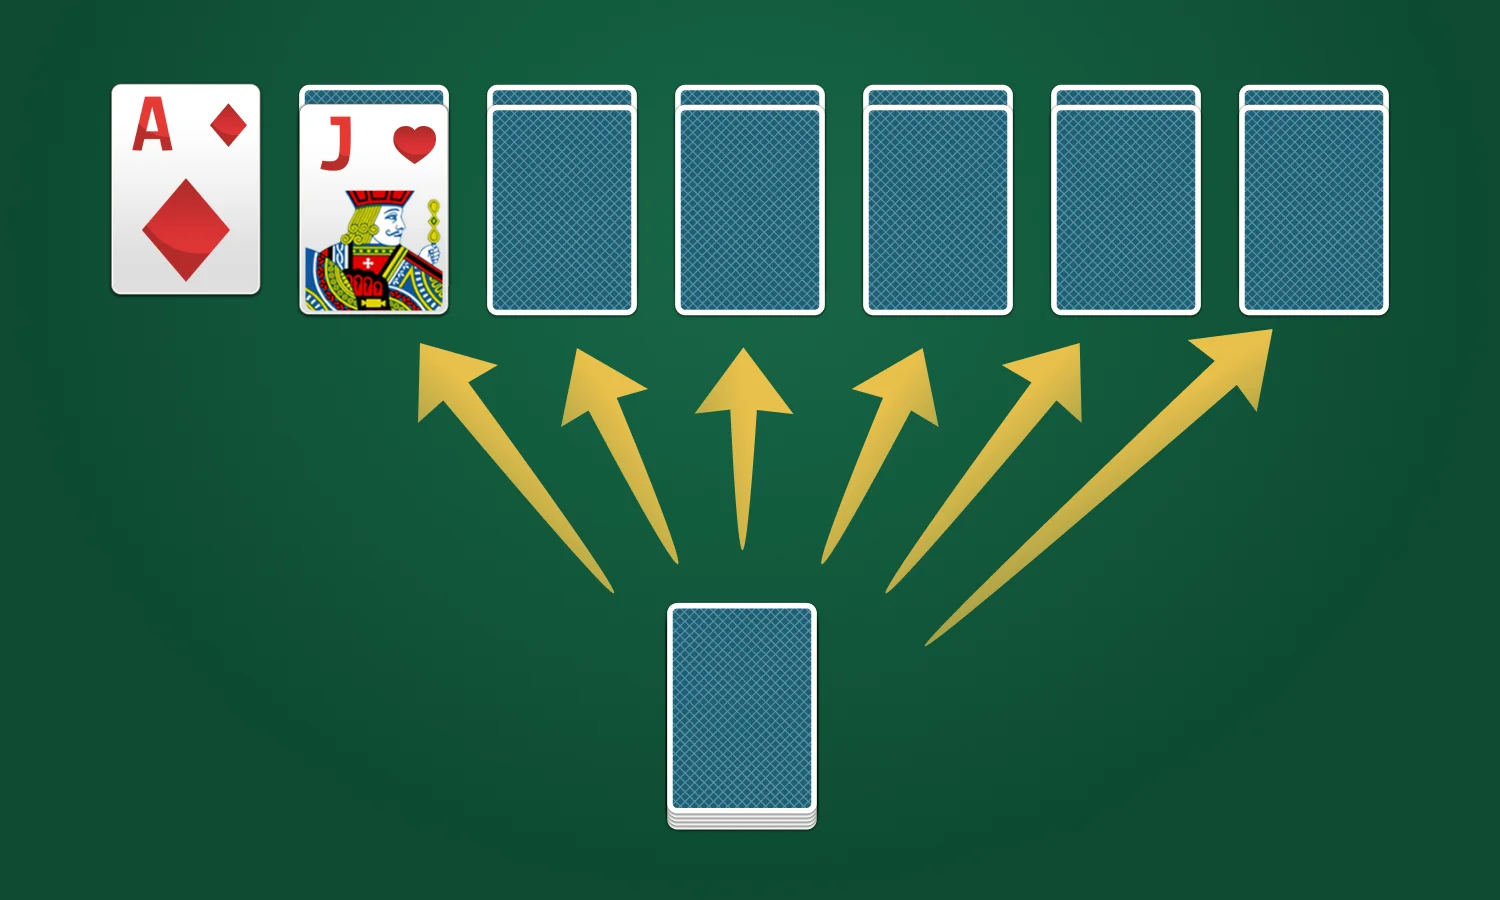 How to Set Up Solitaire 2